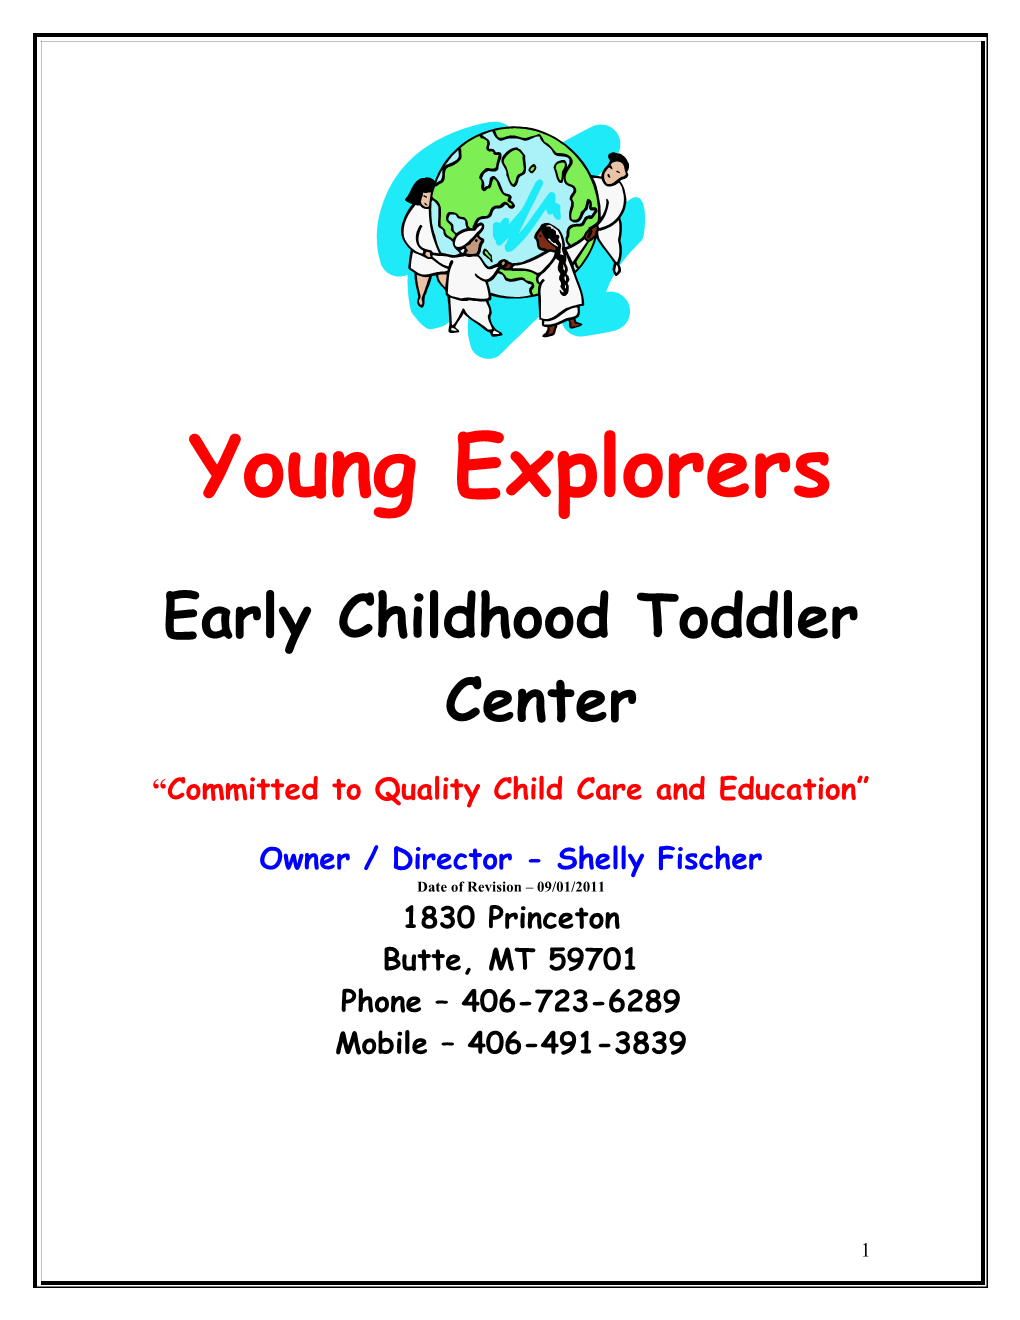 Early Childhood Toddler Center